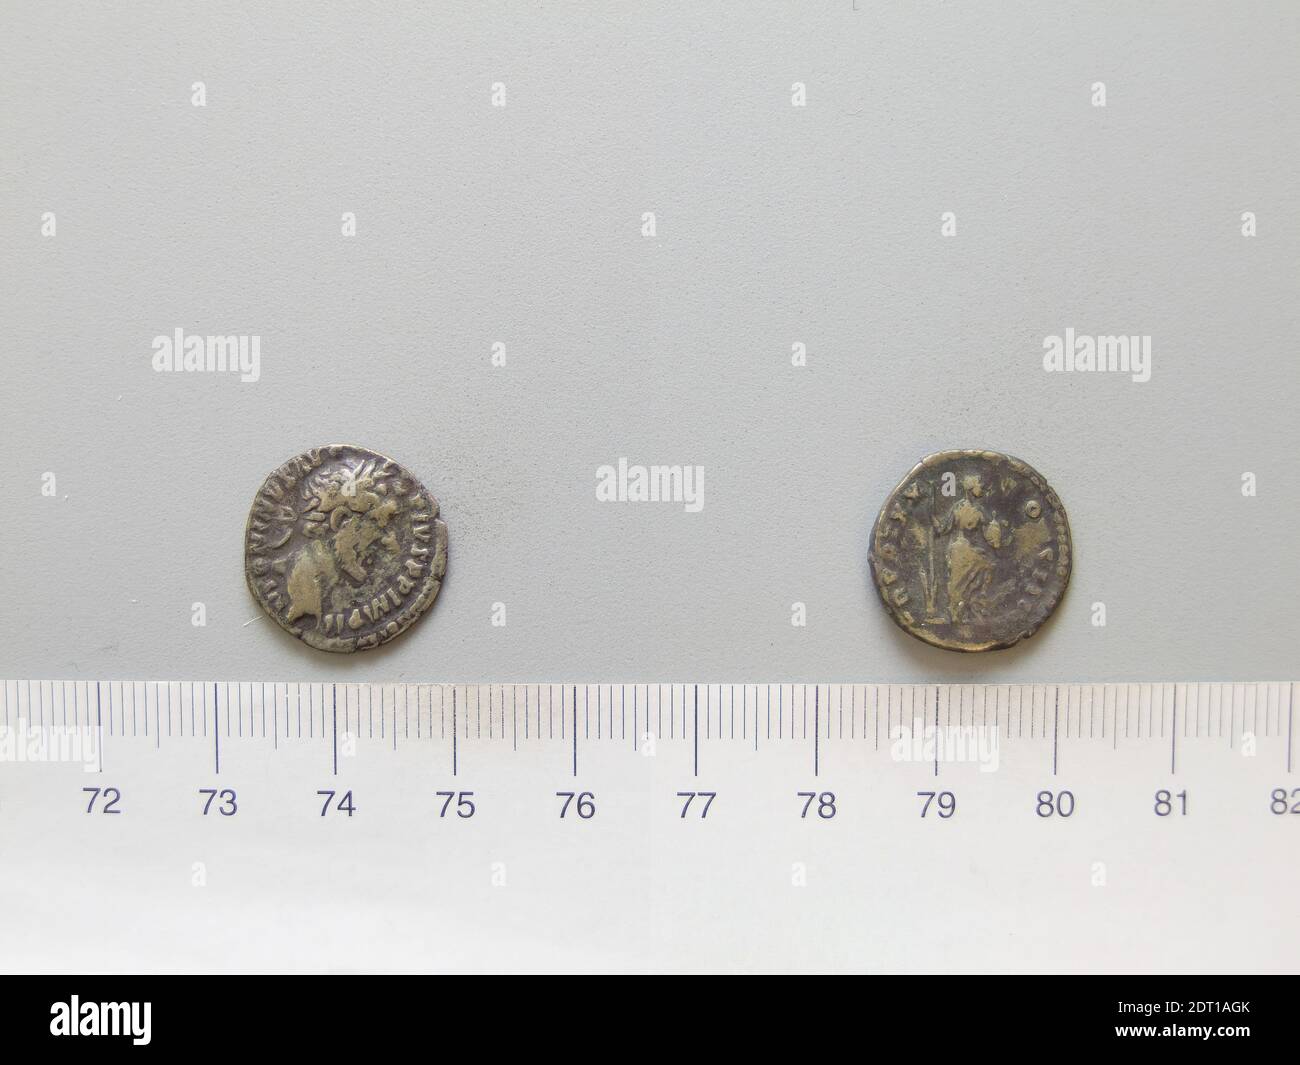 Ruler: Antoninus Pius, Emperor of Rome, A.D. 86–161, ruled A.D. 138–161, Mint: Rome, Denarius of Antoninus Pius, Emperor of Rome from Rome, A.D. 156–57, Silver, 2.76 g, 6:00, 16.7 mm, Made in Rome, Italy, Roman, 2nd century A.D., Numismatics Stock Photo